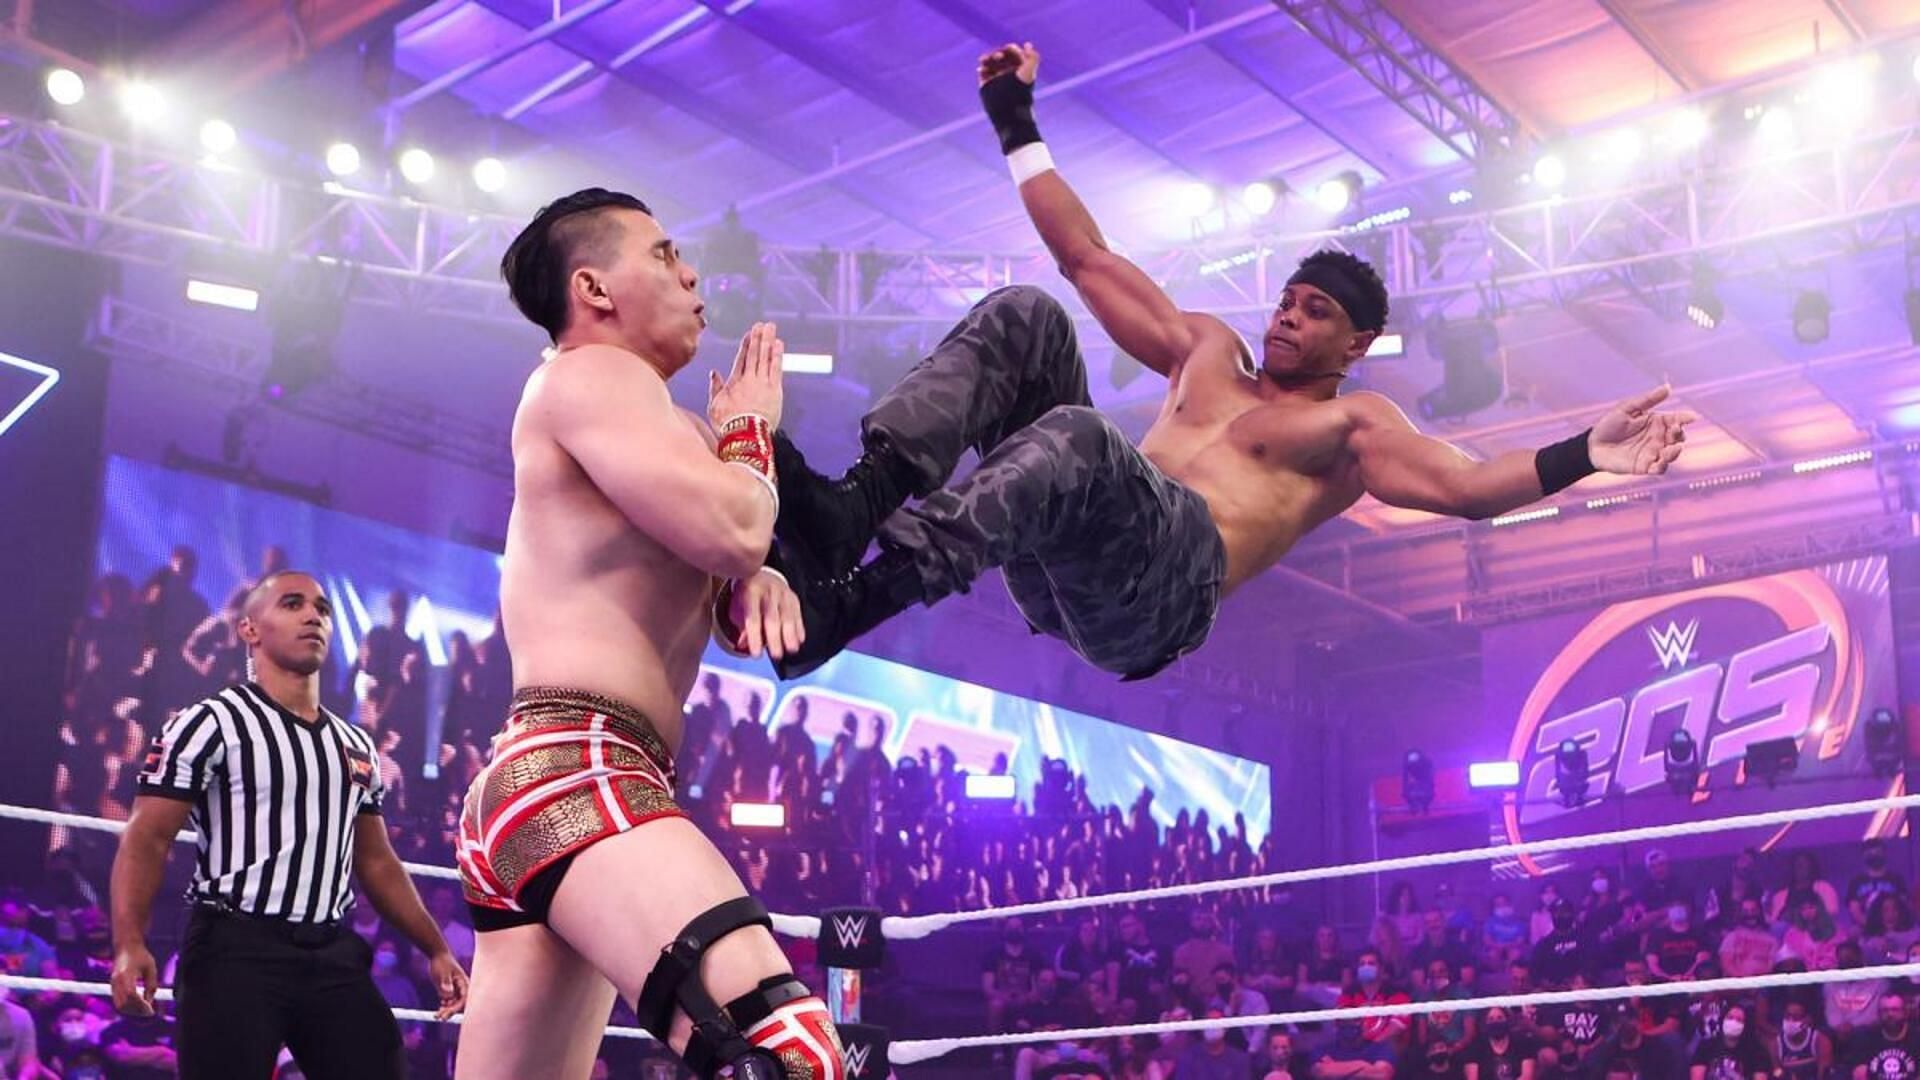 Dante Chen and Draco Anthony battled in the main event of 205 Live